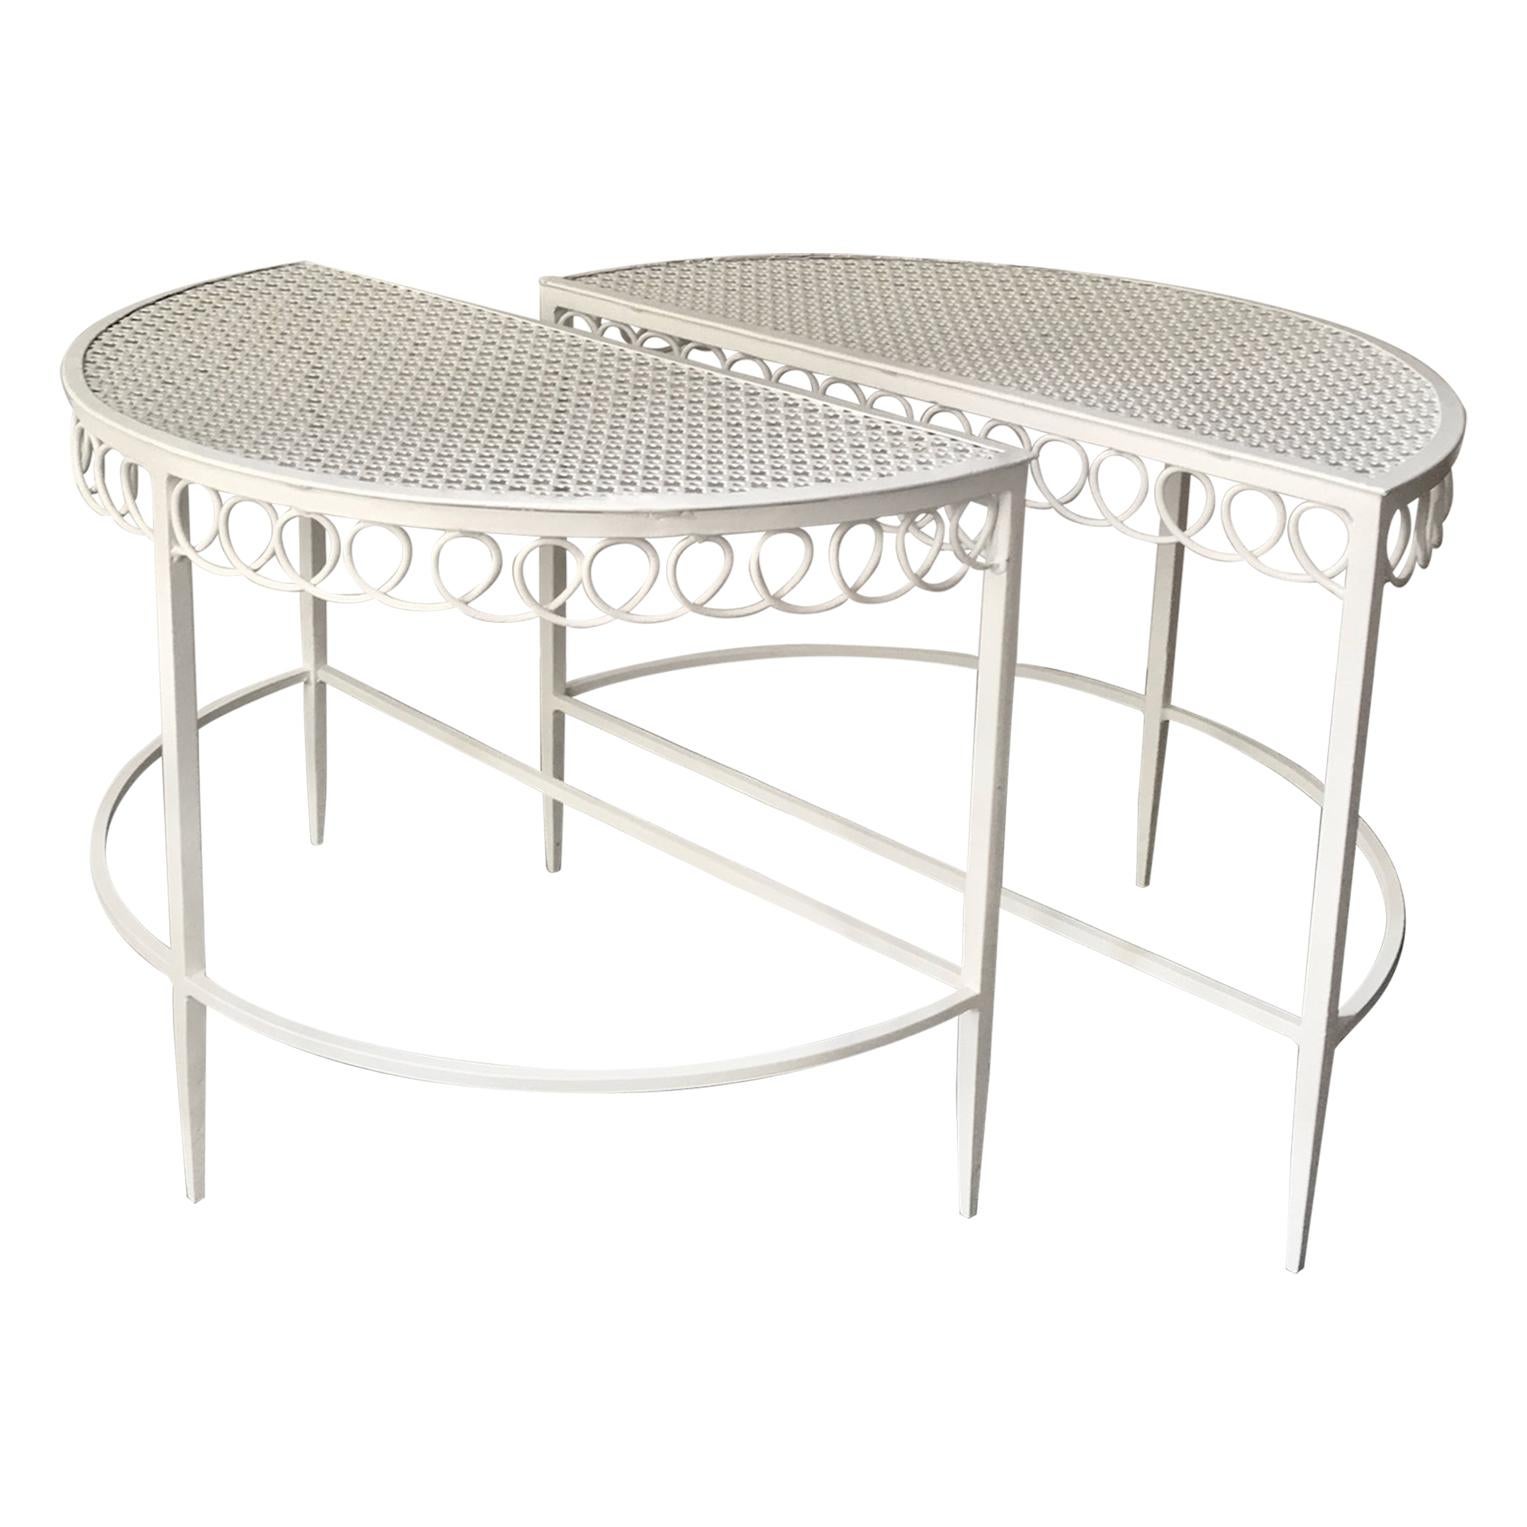 Pair of Demilune Metal Tables in White by Matégot, Mid-20th Century France